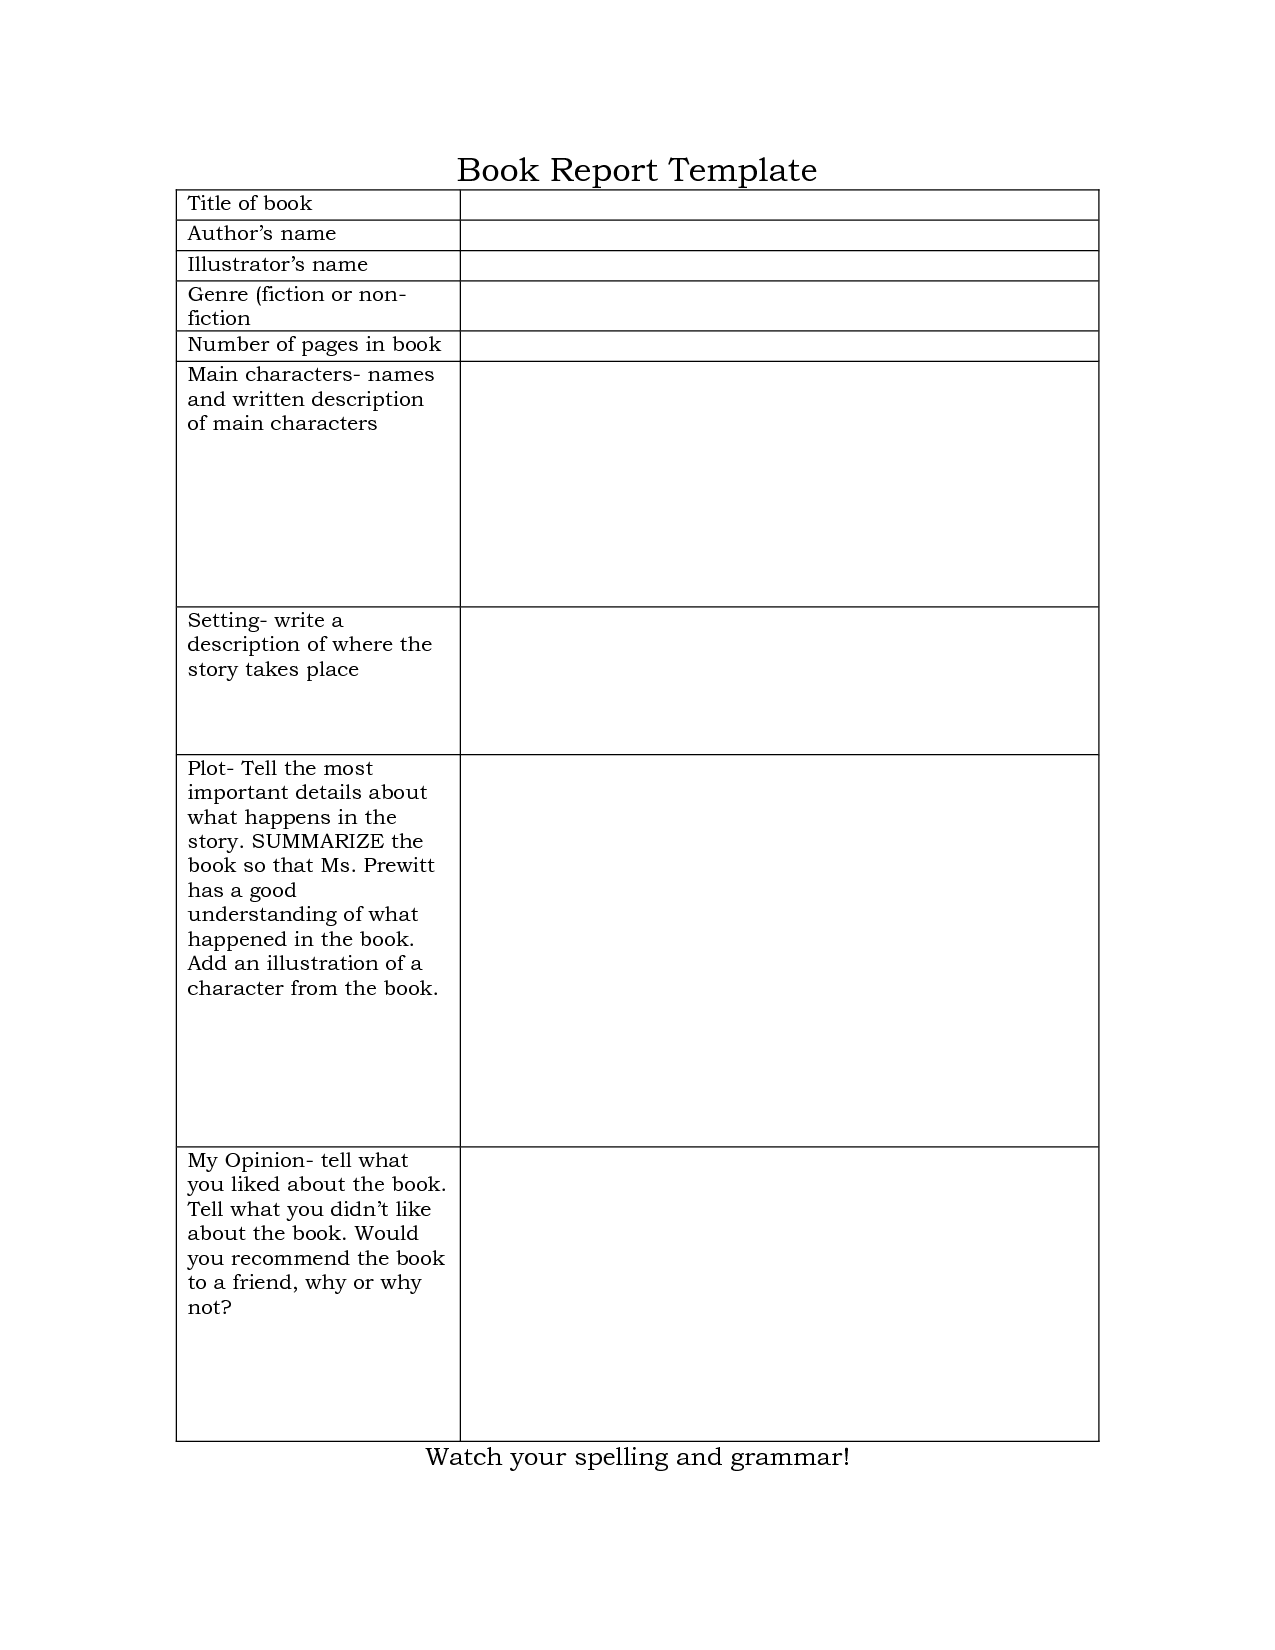 Book Report Outline Template